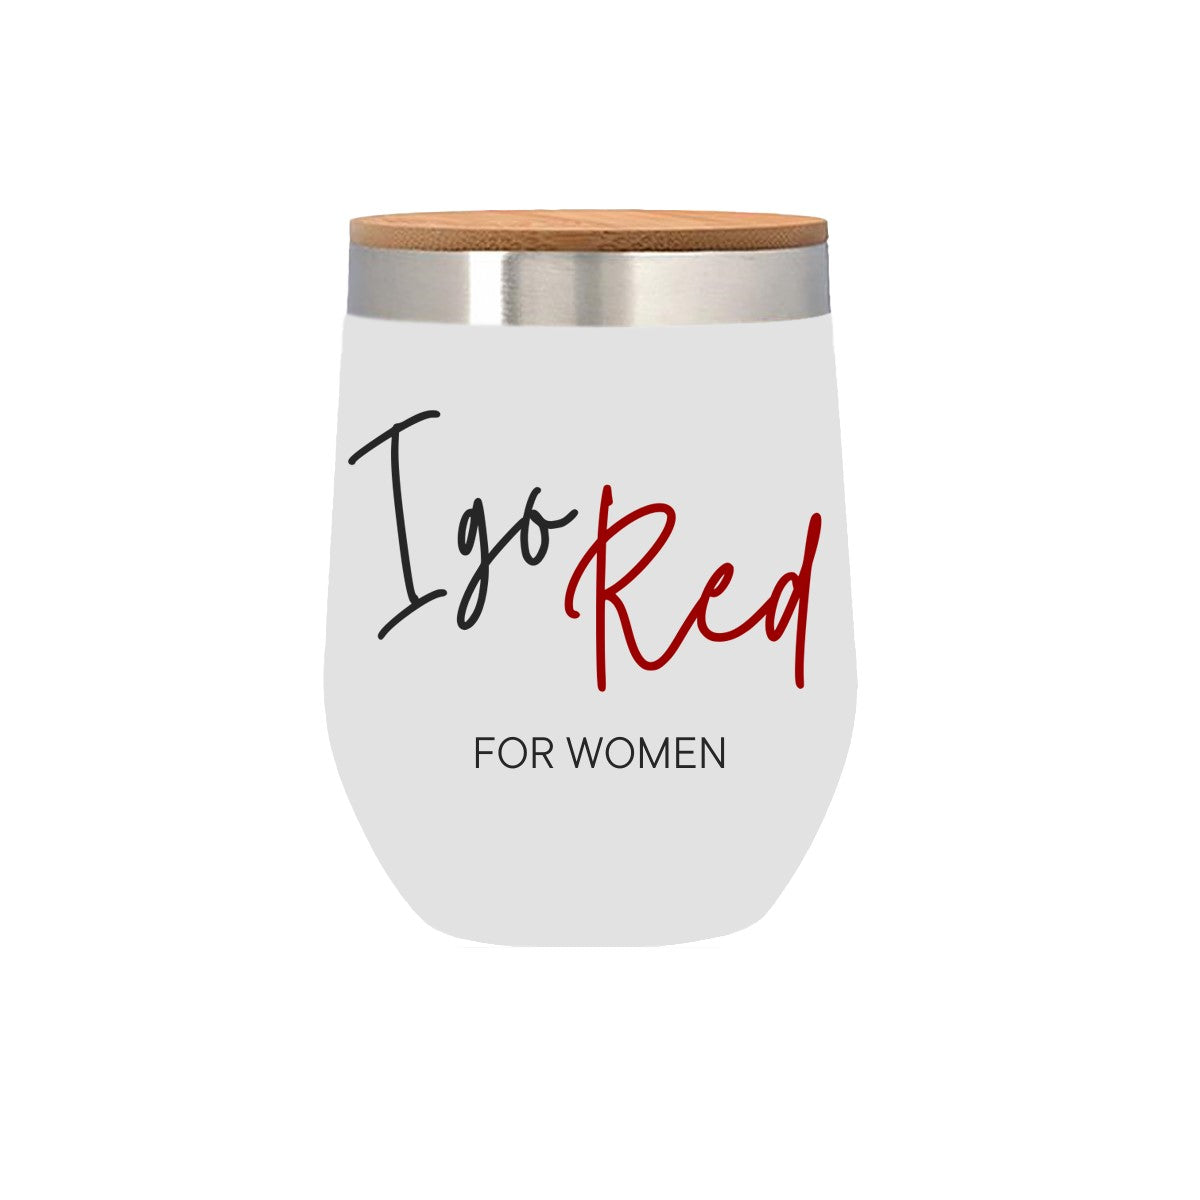 White powder-coated Tumbler that says "I Go Red for Women" on the front in stylized fonts.